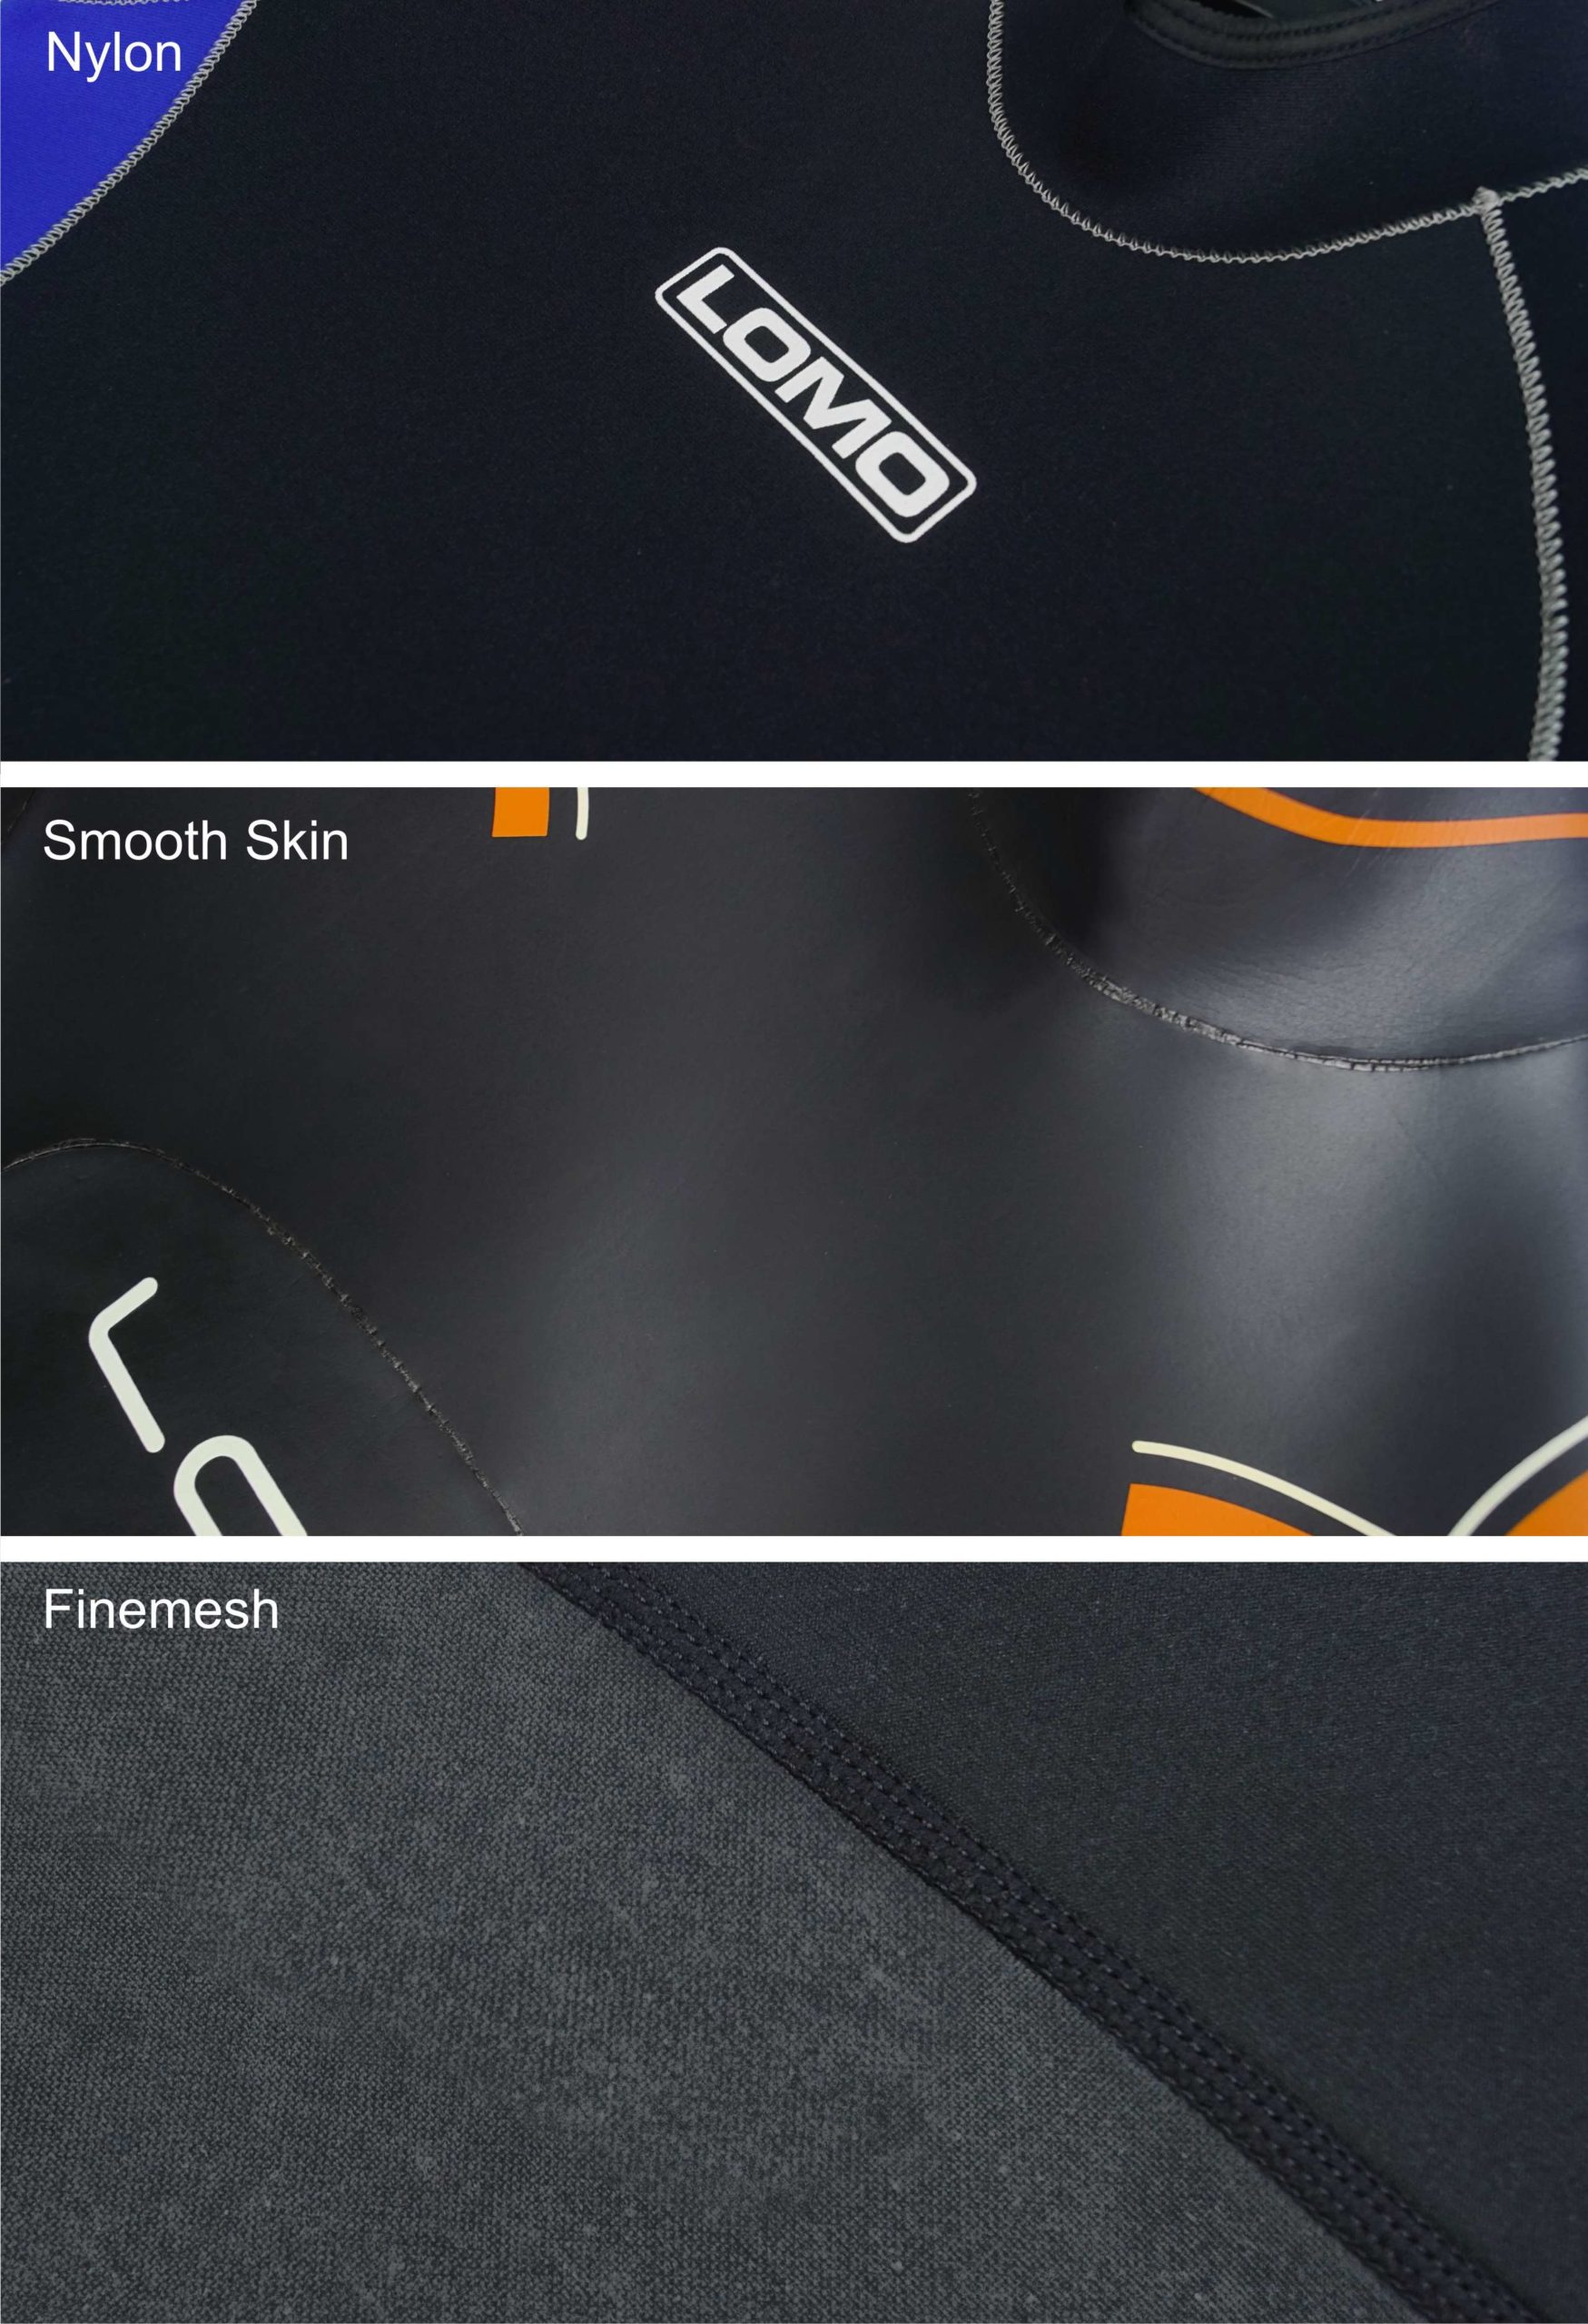 How Wetsuits Work - Surface Coatings